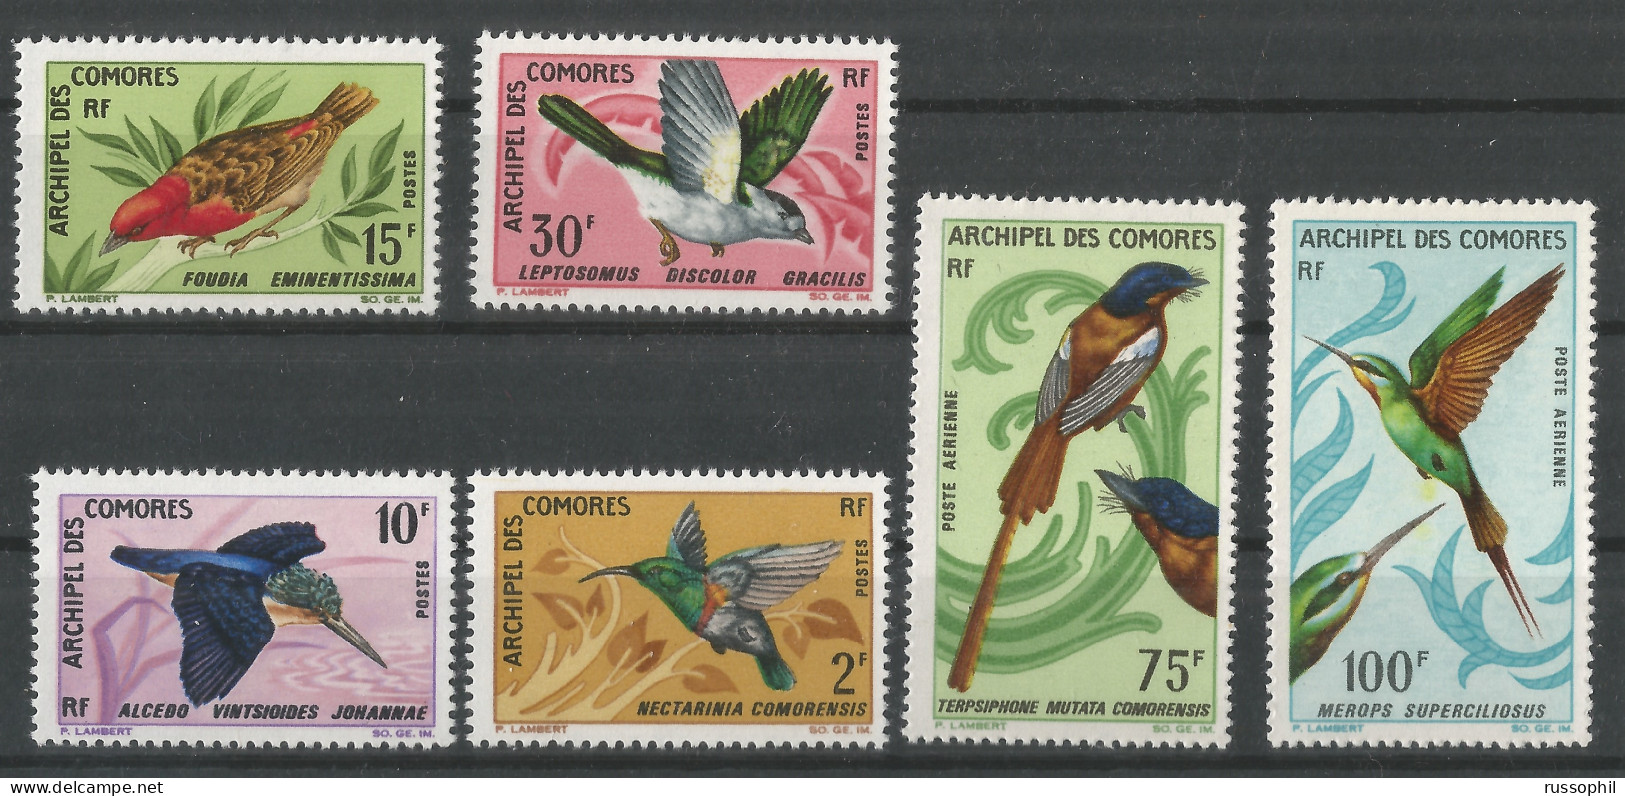 COMORES - OISEAUX - BIRDS -  Yv. #41 TO Yv. #44 AND Yv. #PA20 AND Yv. #PA21 -  (**/MNH) - 1967 - Ongebruikt